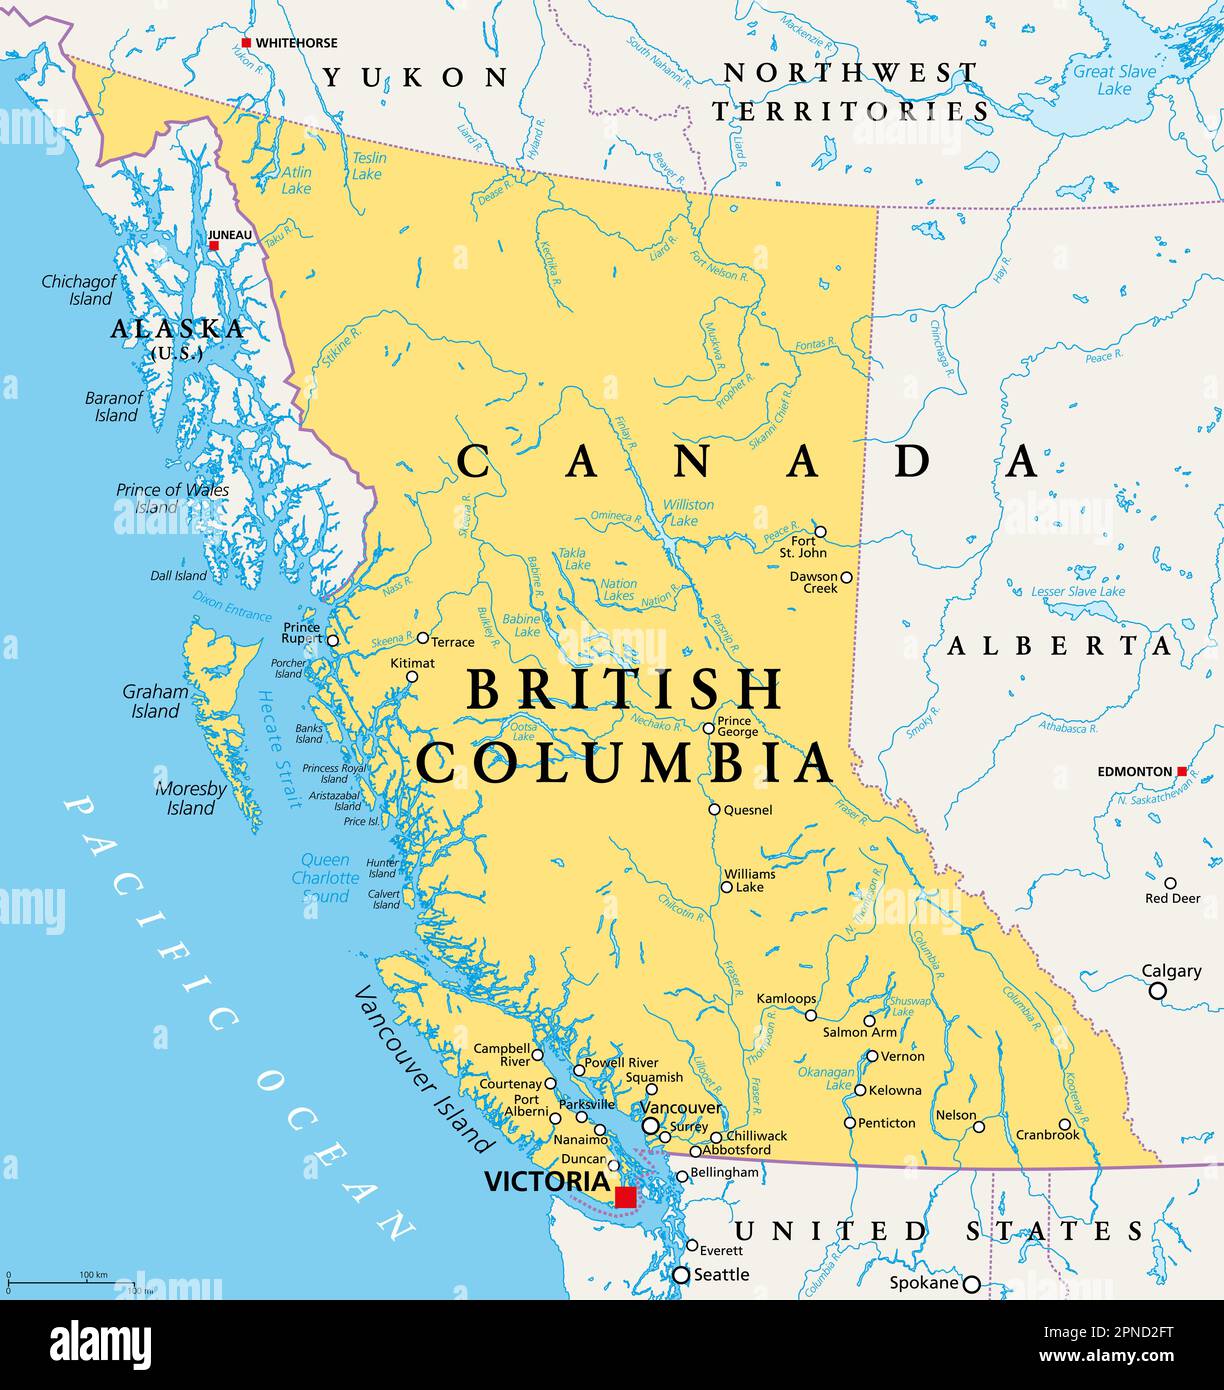 British Columbia, BC, westernmost province of Canada, political map. Situated on the Pacific Ocean, with the capital Victoria. Stock Photo